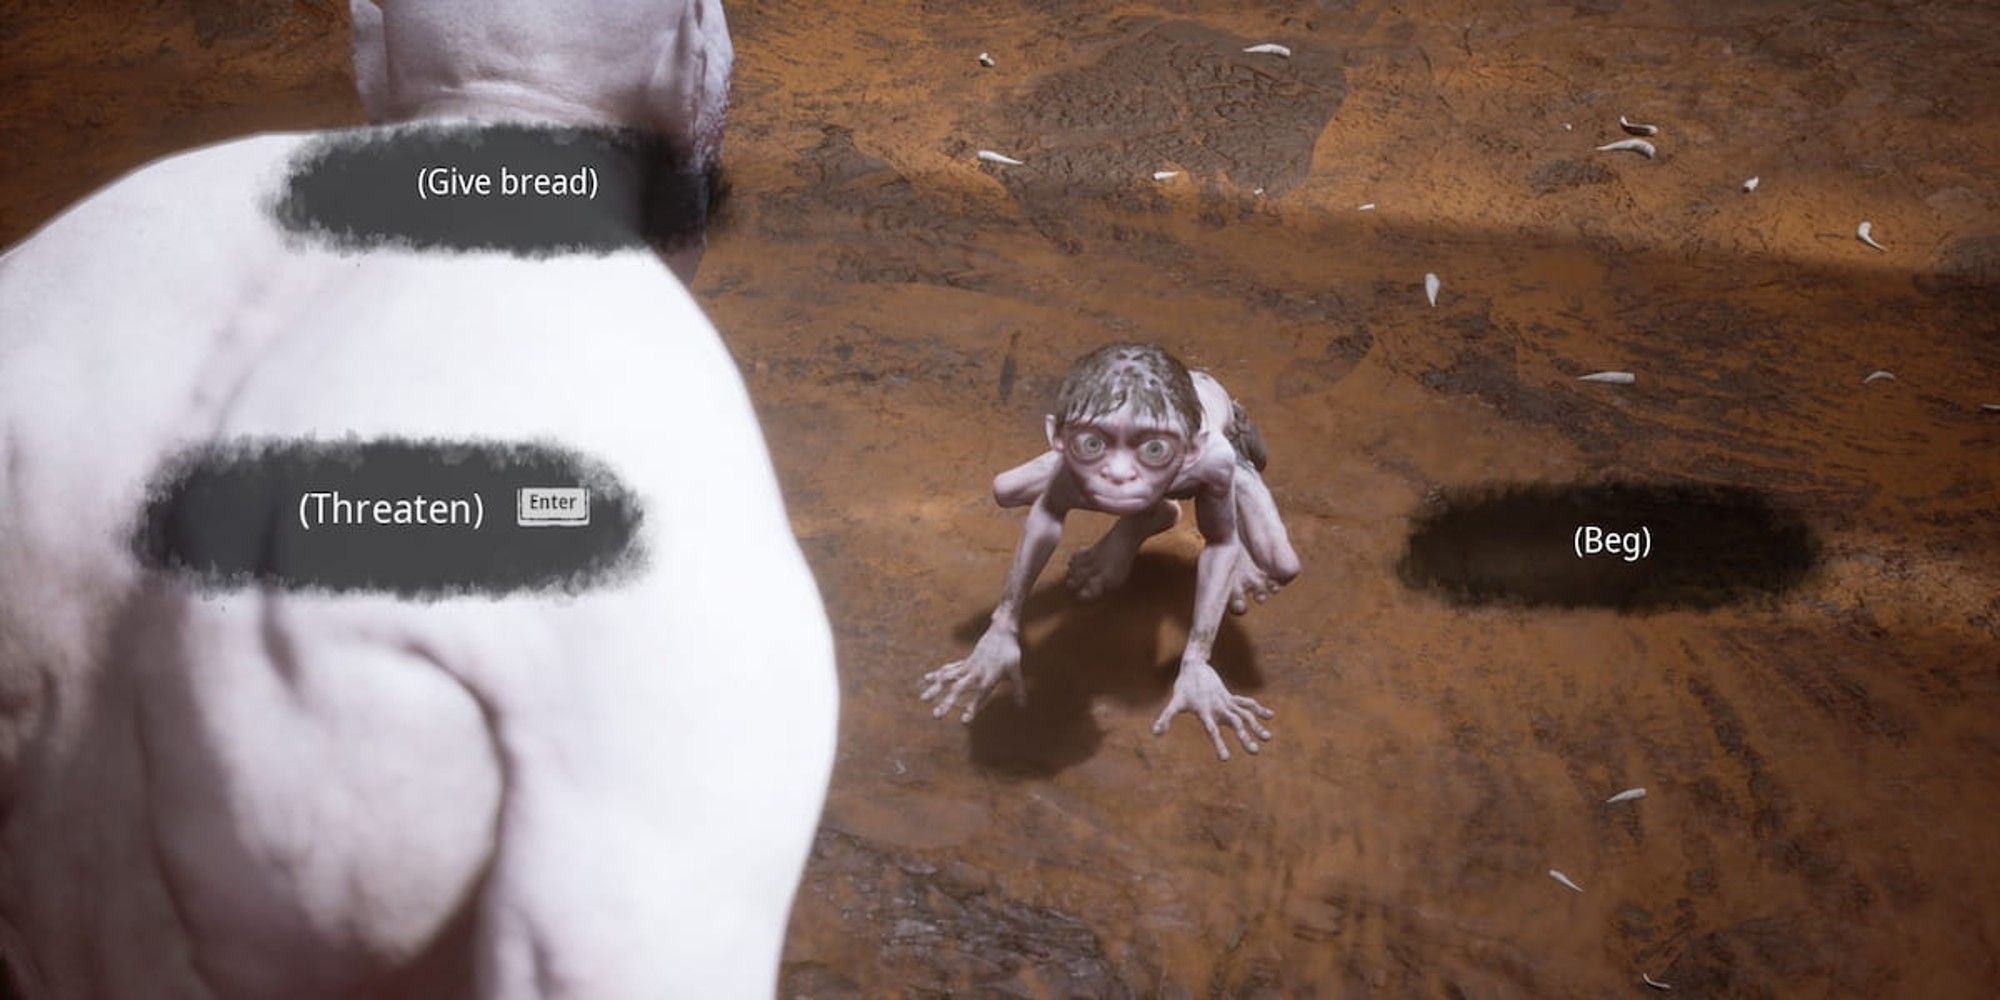 Gollum with the option to beg, threaten, or give bread to an orc in the foreground